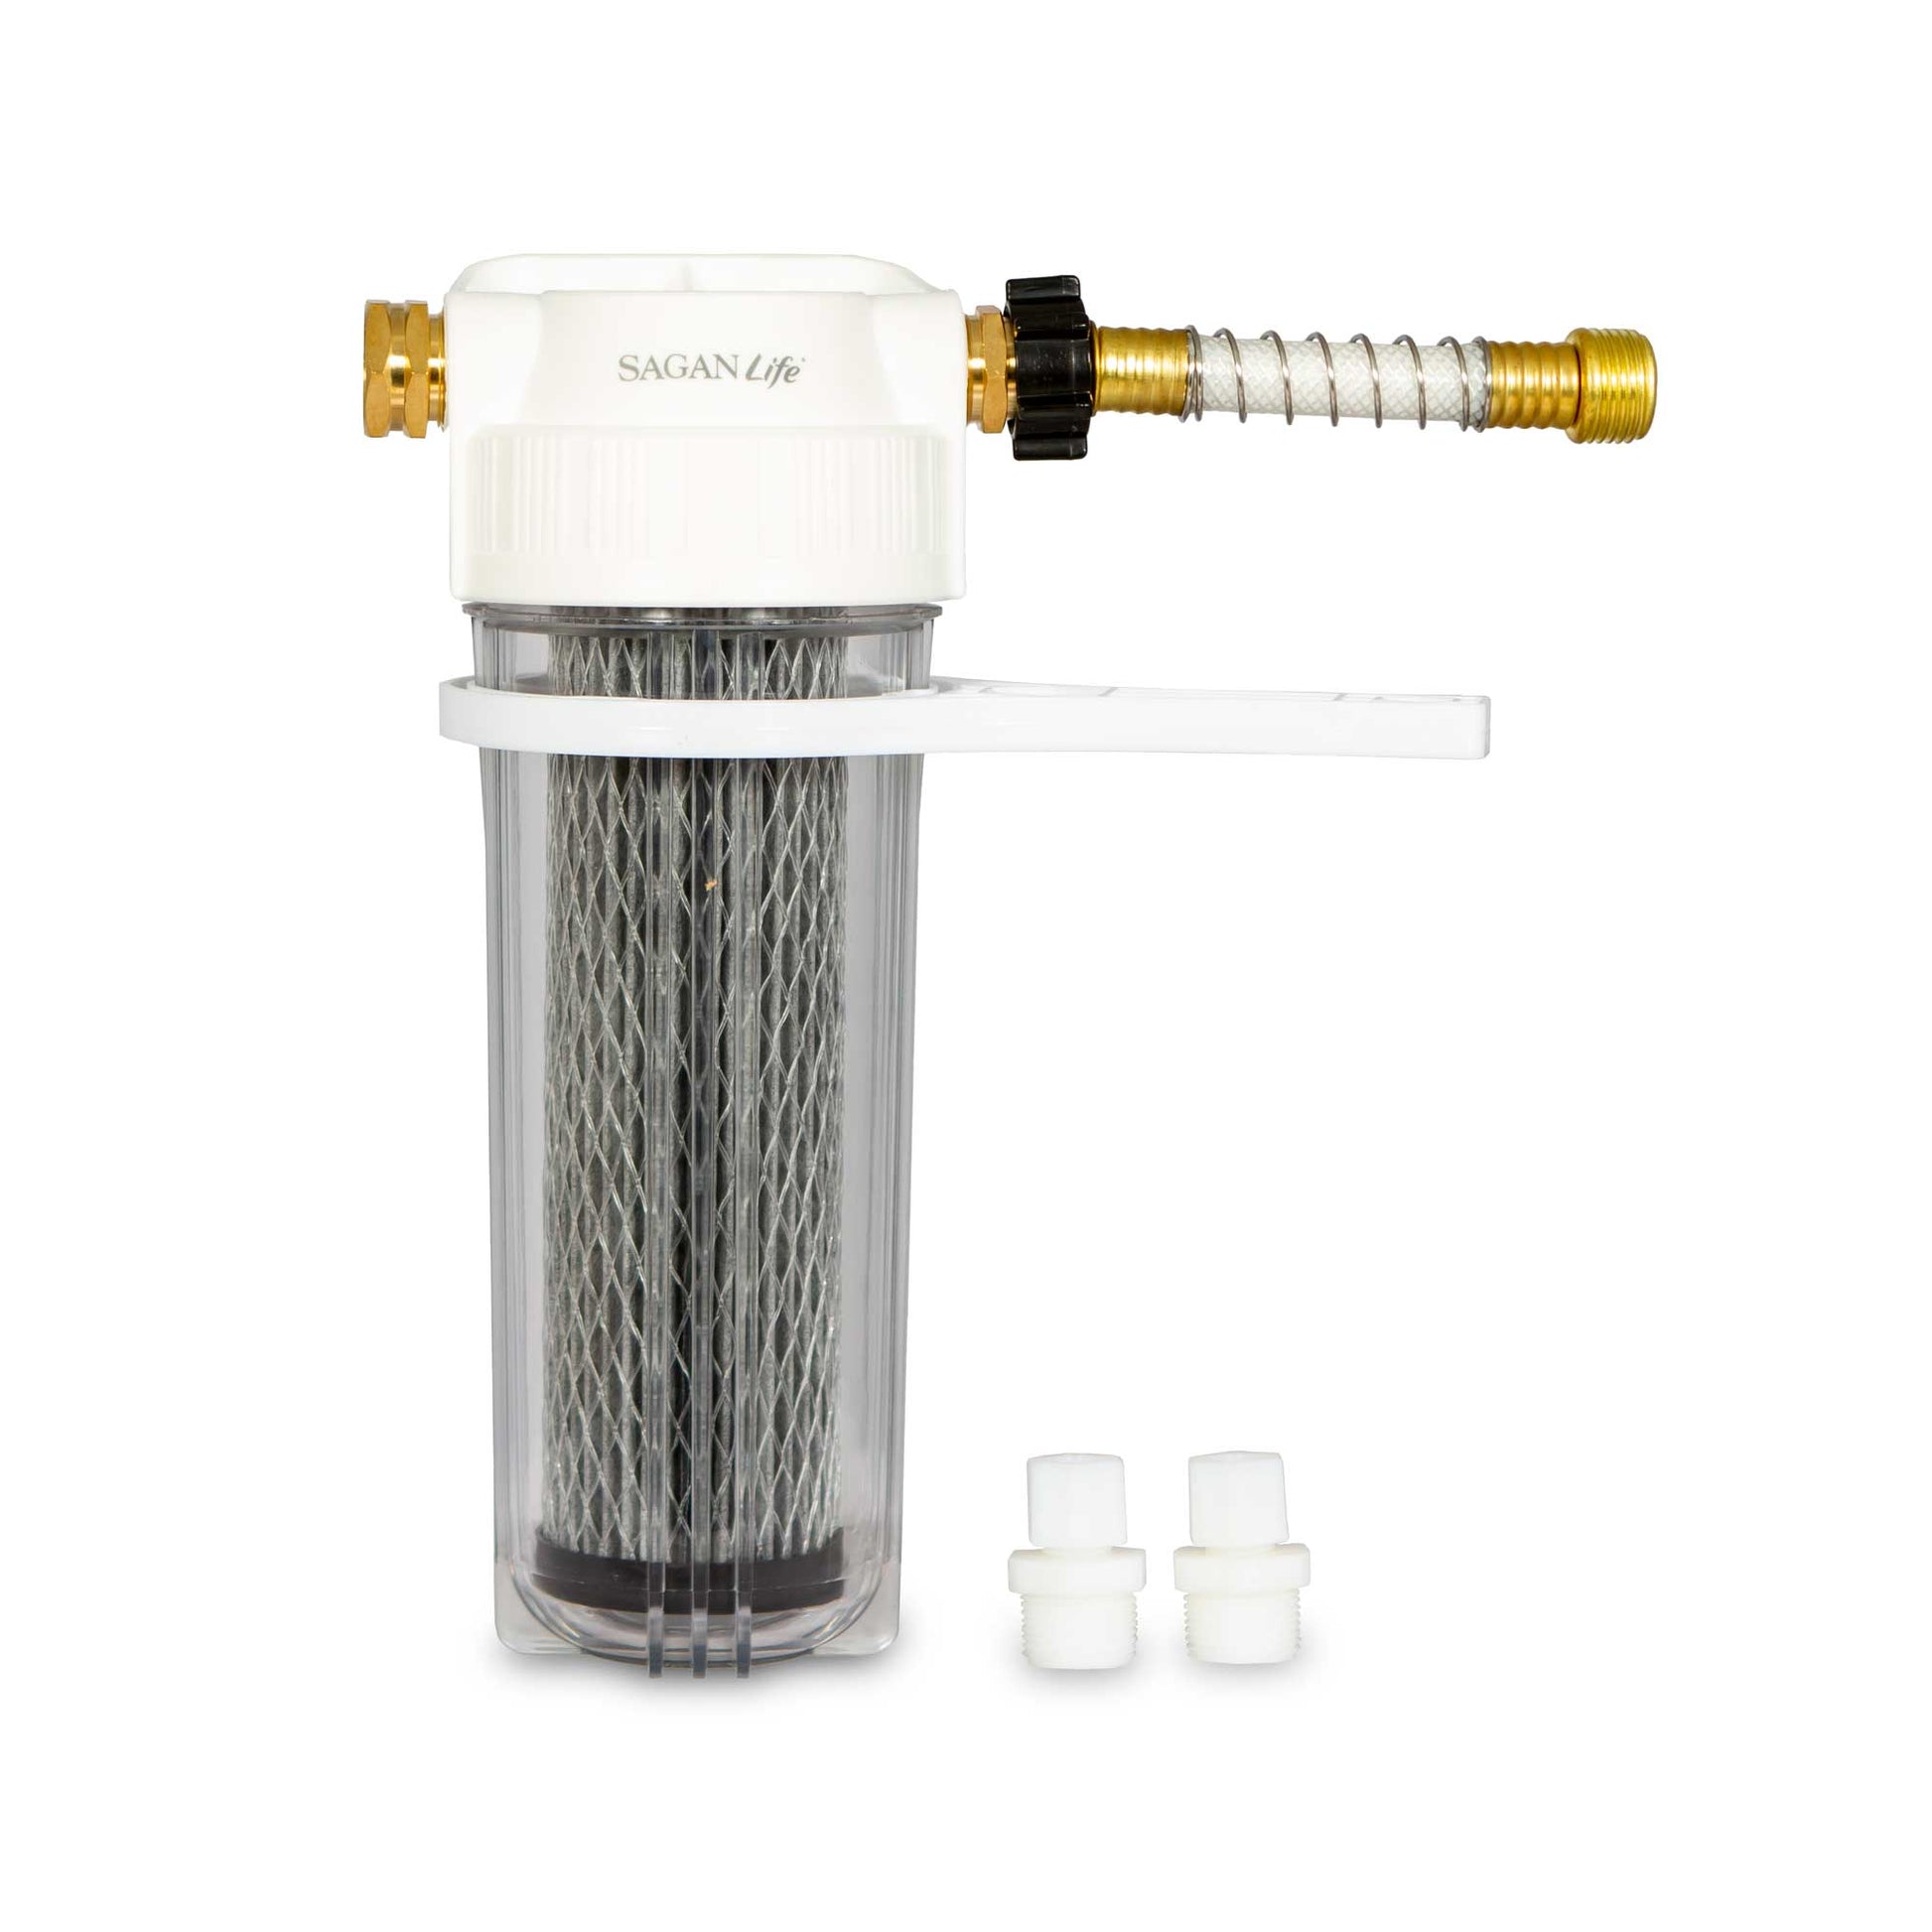 RV Water Filter Kit – Best Water Purification for RV's, Motorhomes